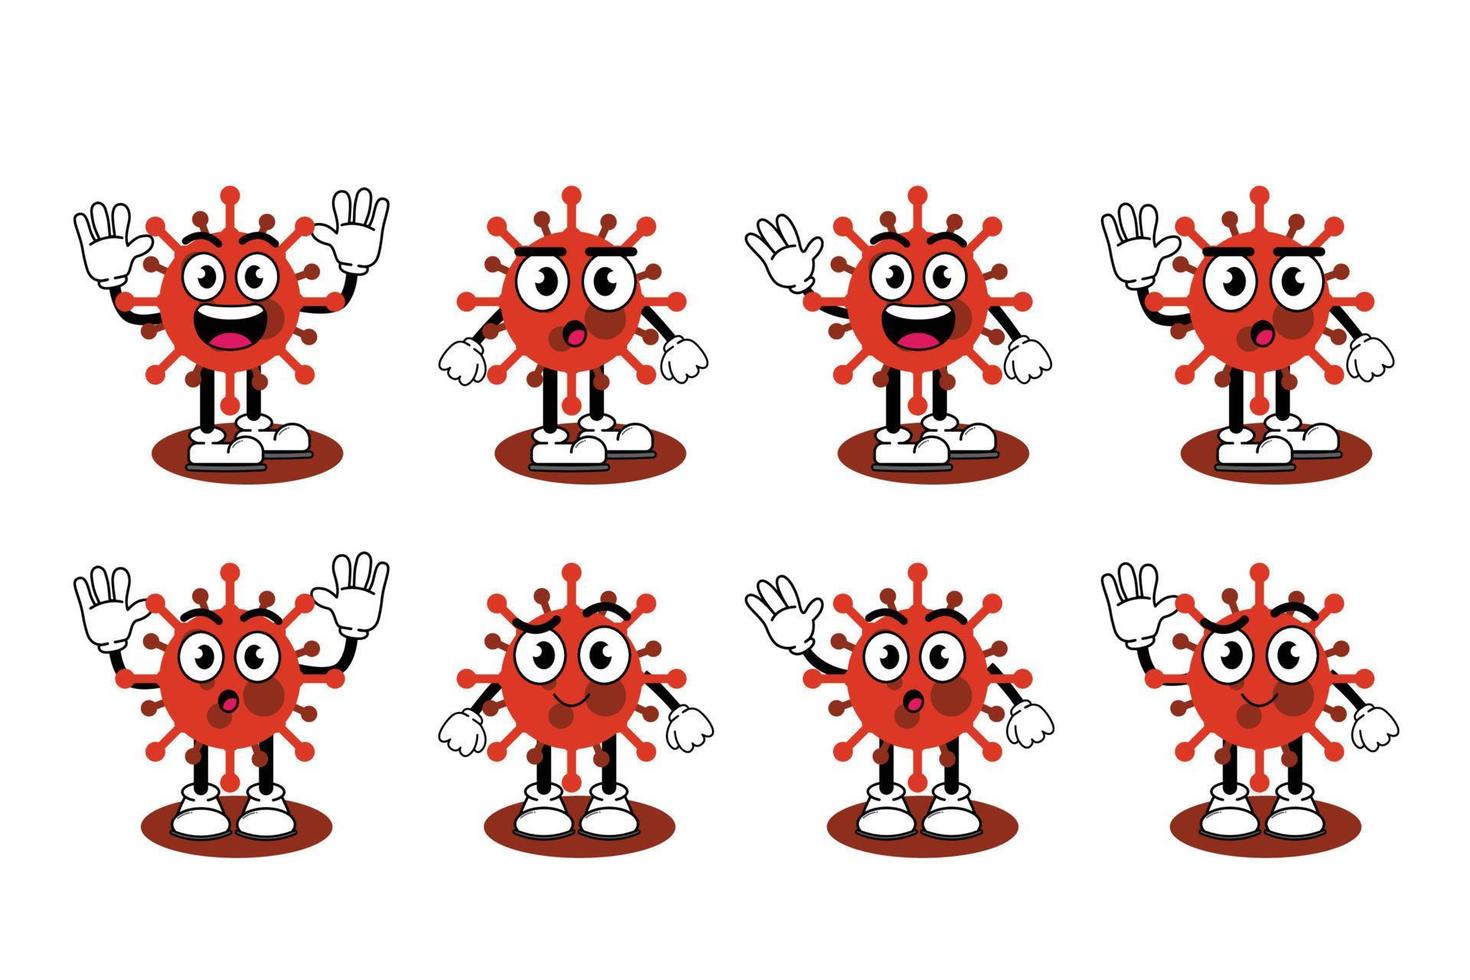 Illustration vector graphic cartoon character of Cute mascot Virus with pose. Suitable for children book illustration and element design.